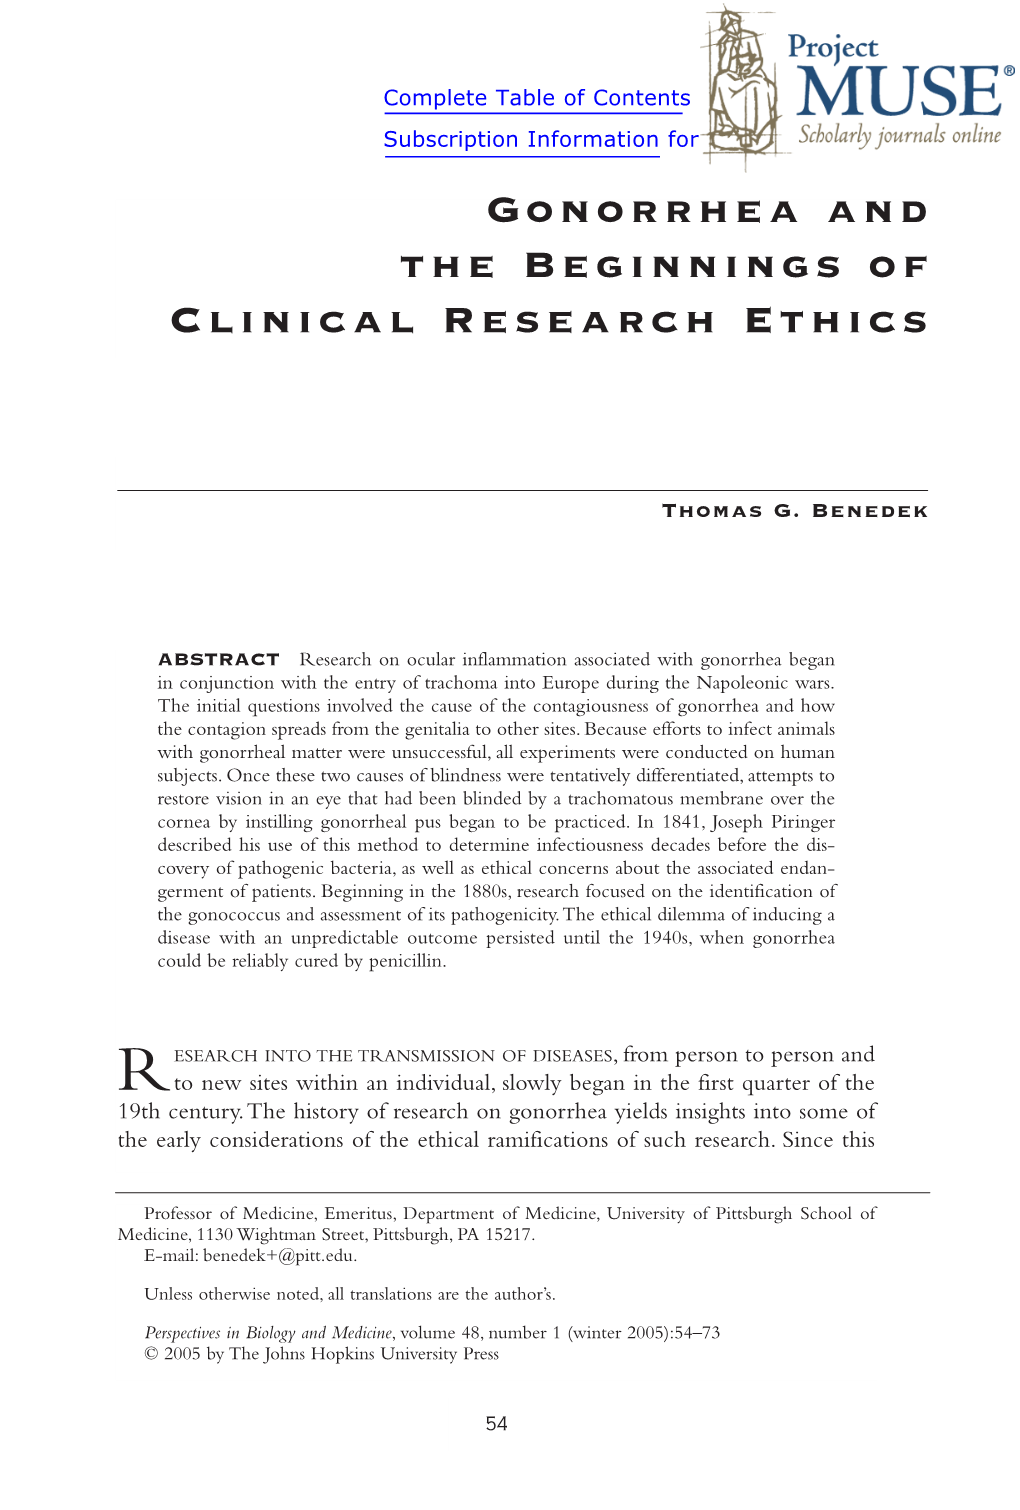 Gonorrhea and the Beginnings of Clinical Research Ethics